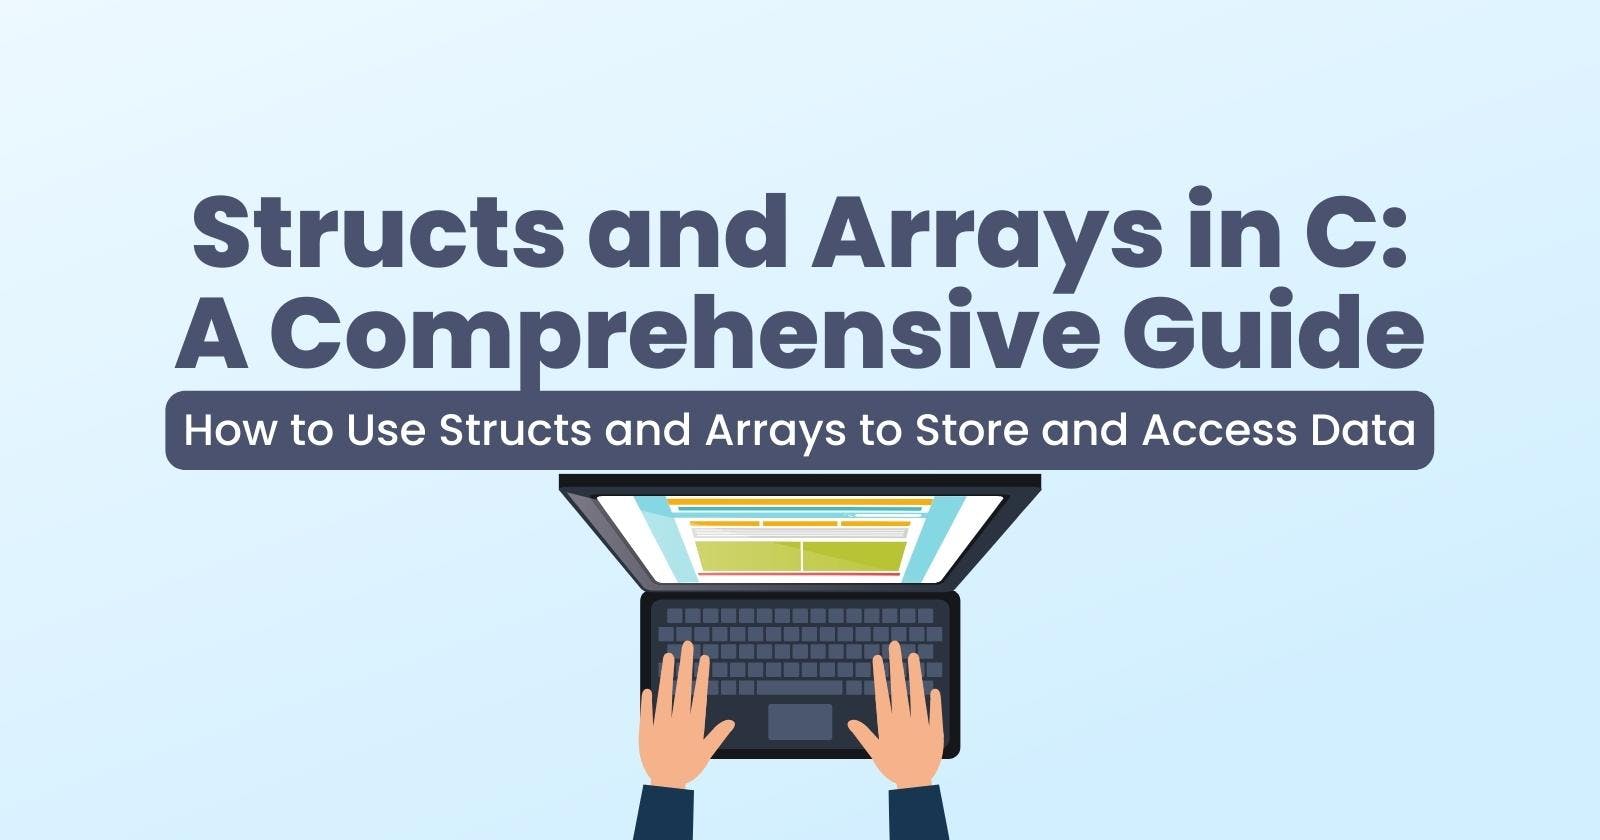 Structs and Arrays in C: A Comprehensive Guide